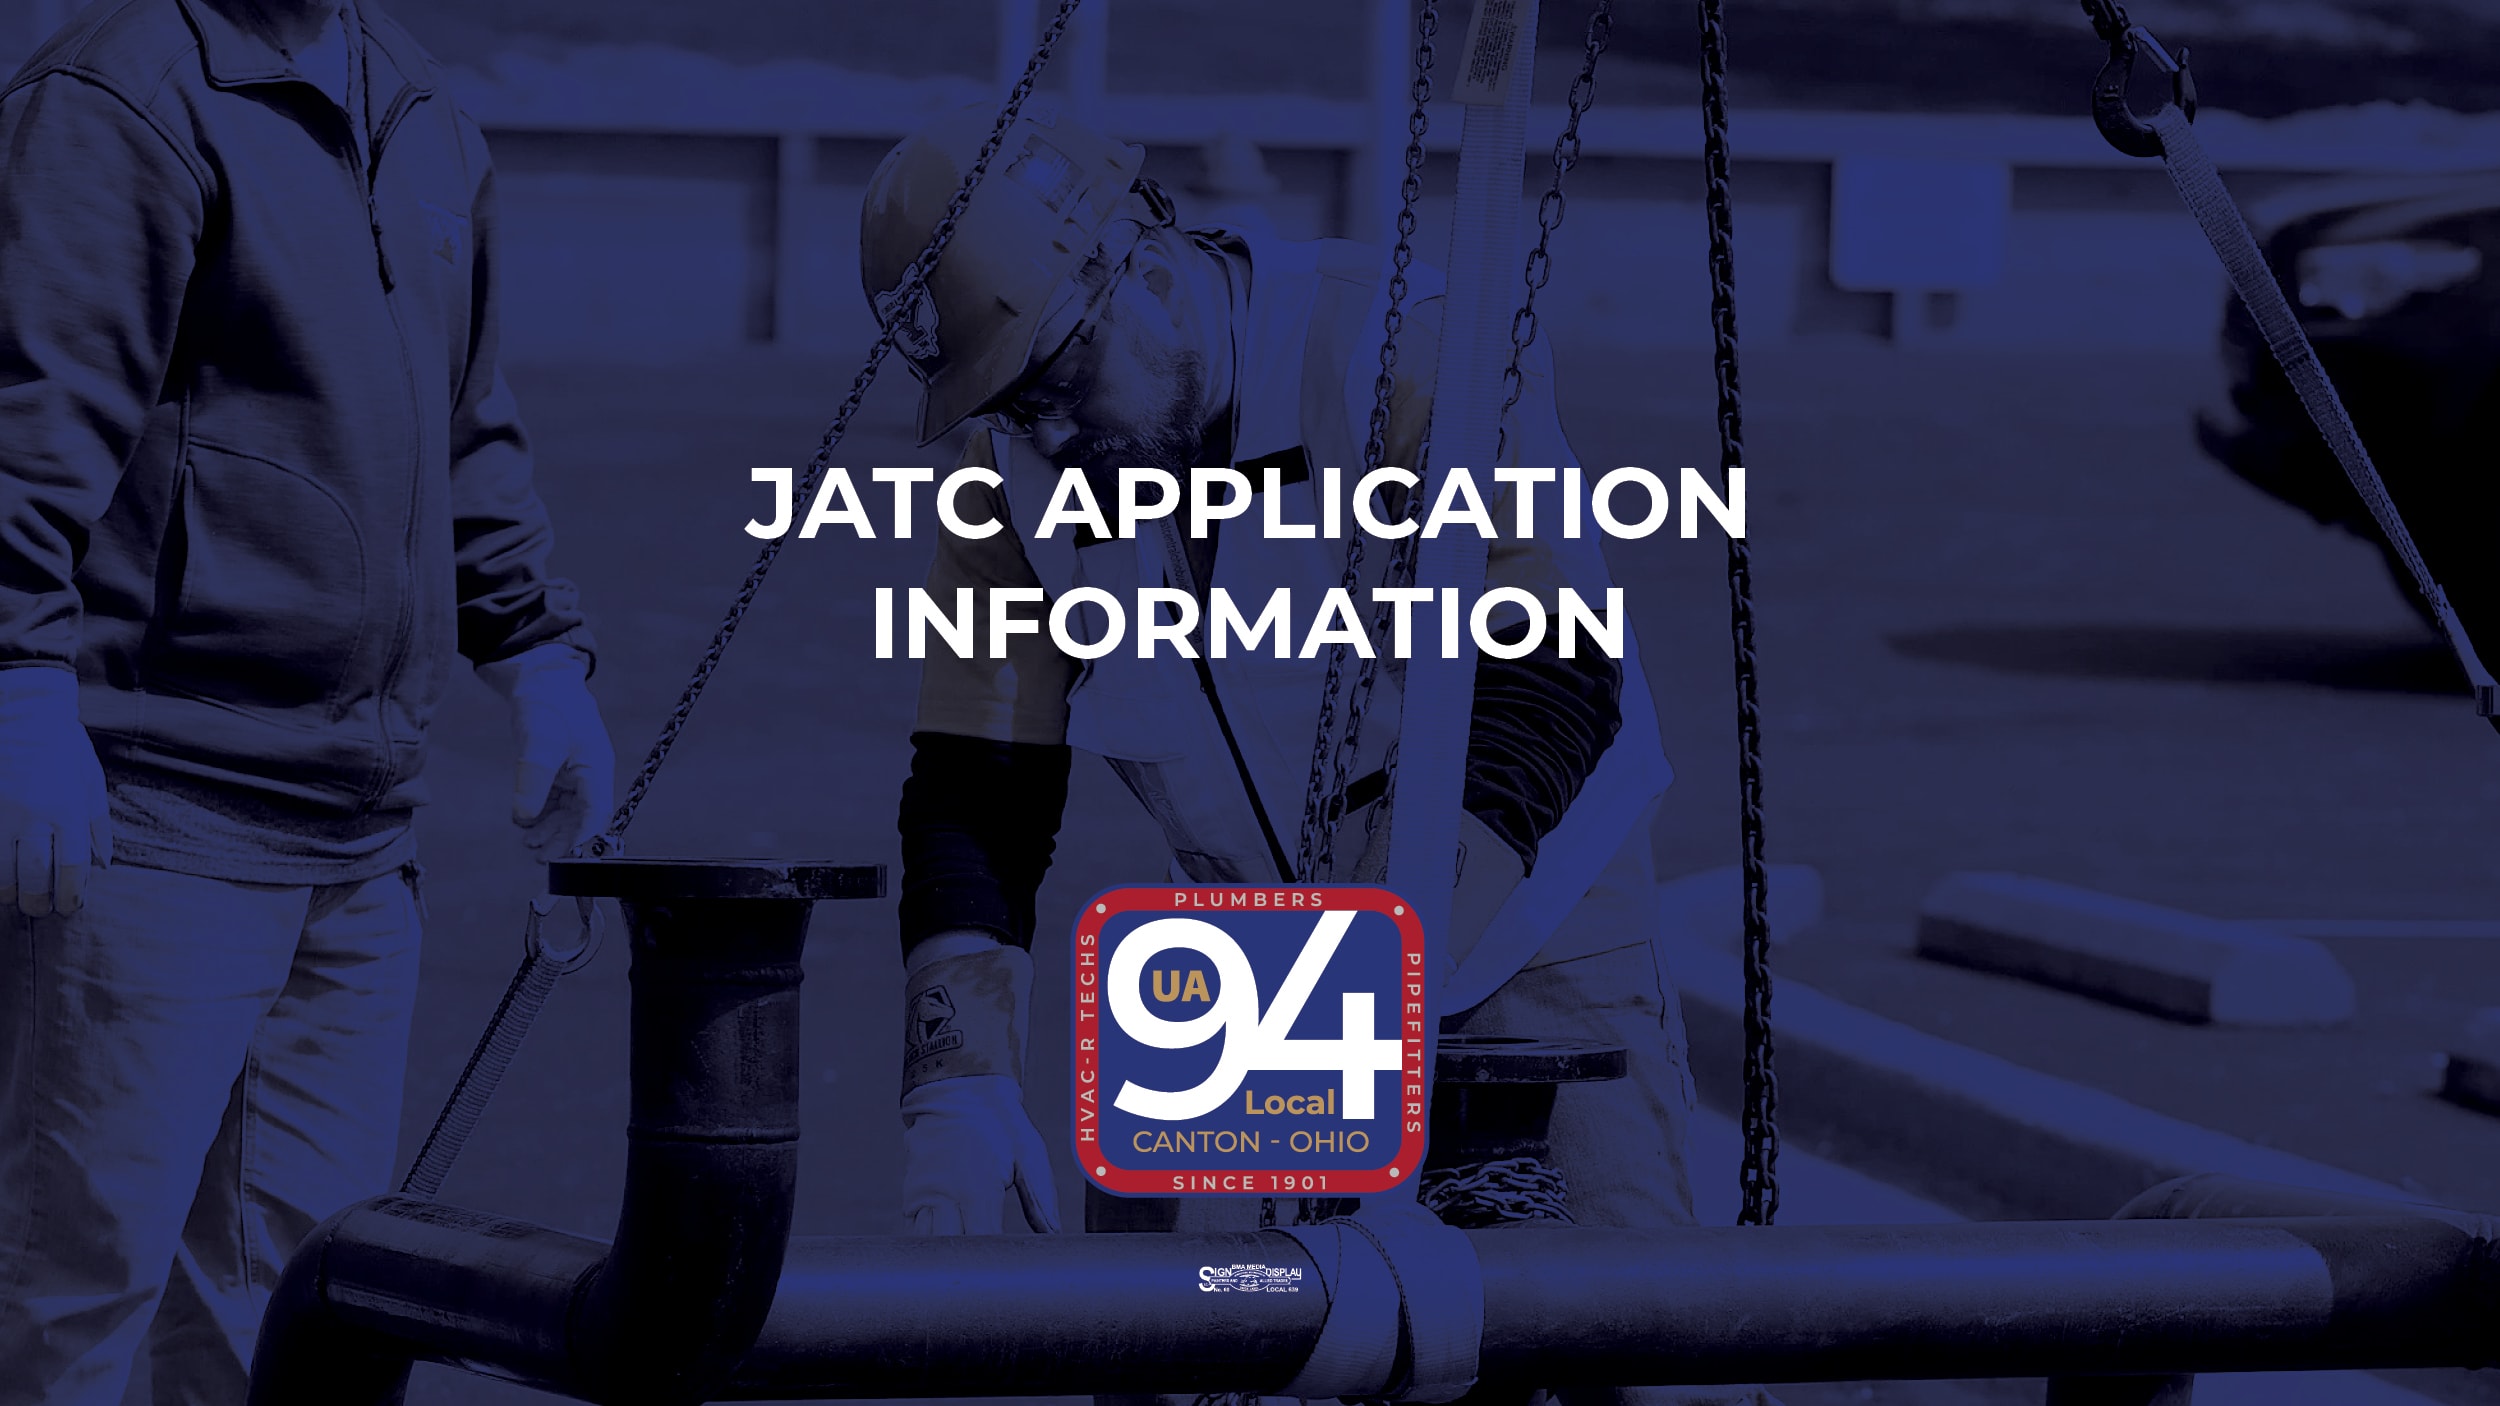 Apply for the Plumbers & Pipefitters Local 94 JATC Apprenticeship